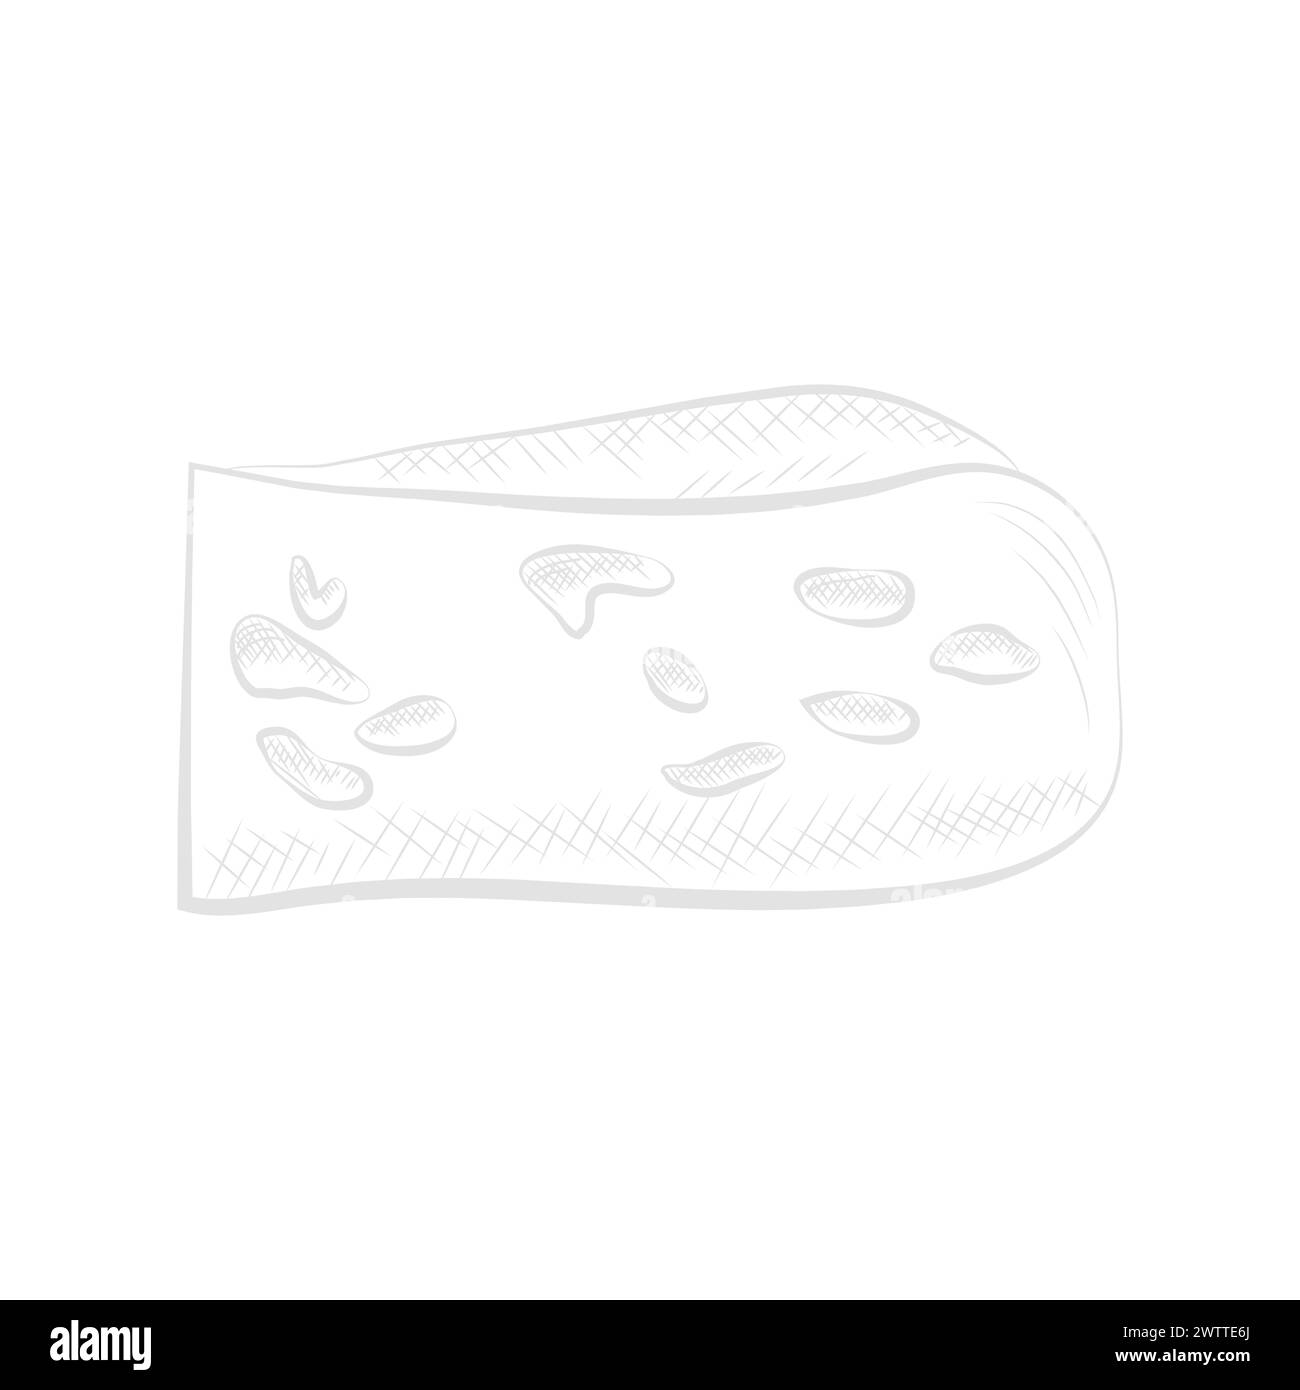 Slice of blue cheese line sketch, moldy delicatessen dairy product vector illustration Stock Vector